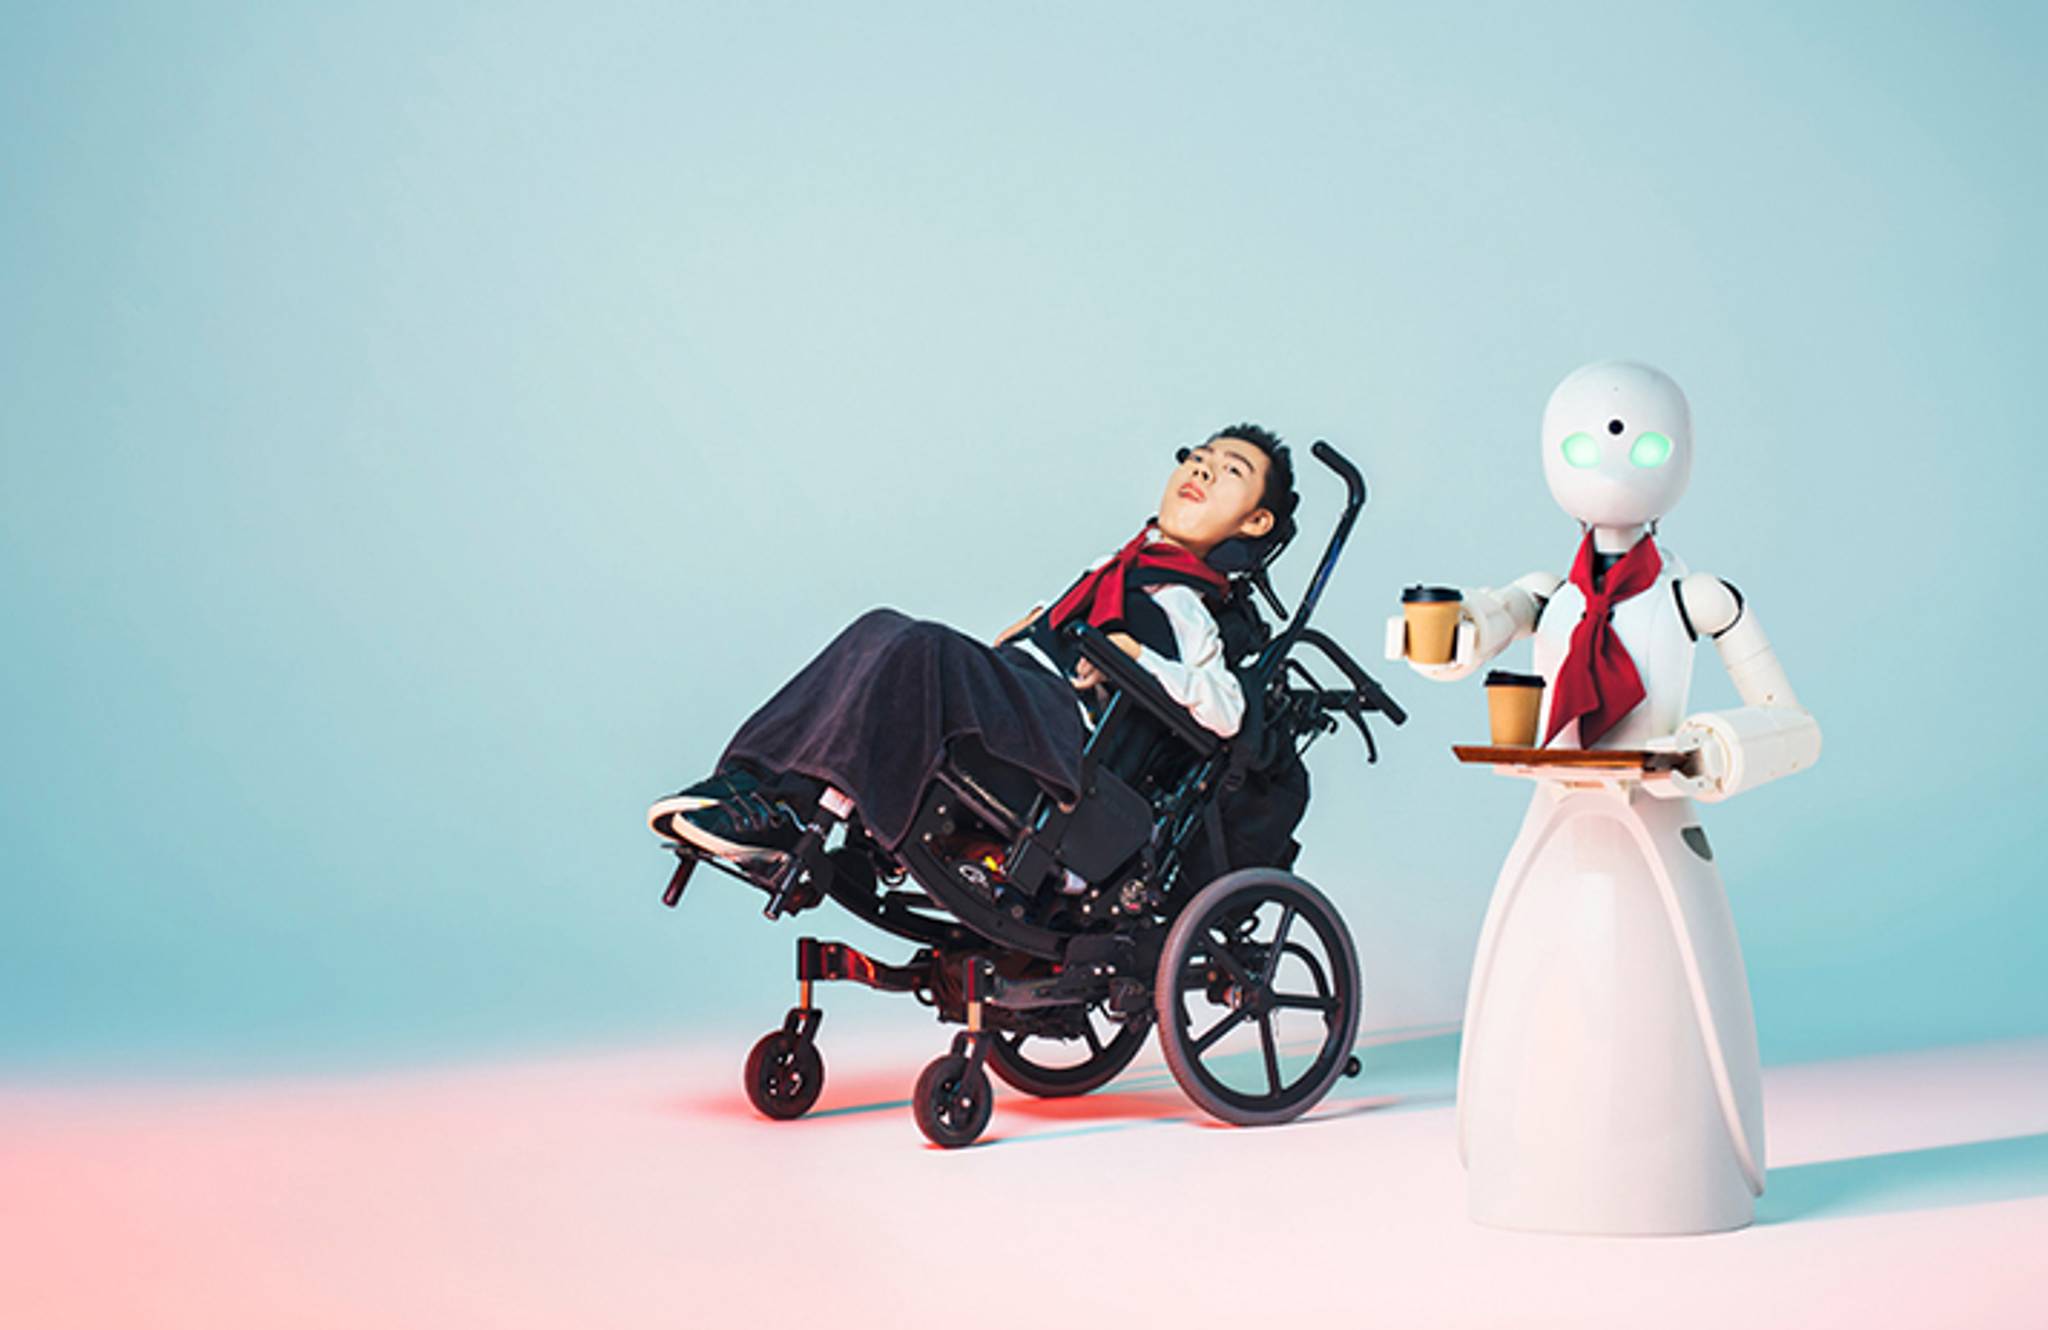 Robot café helps bedbound workers stay connected